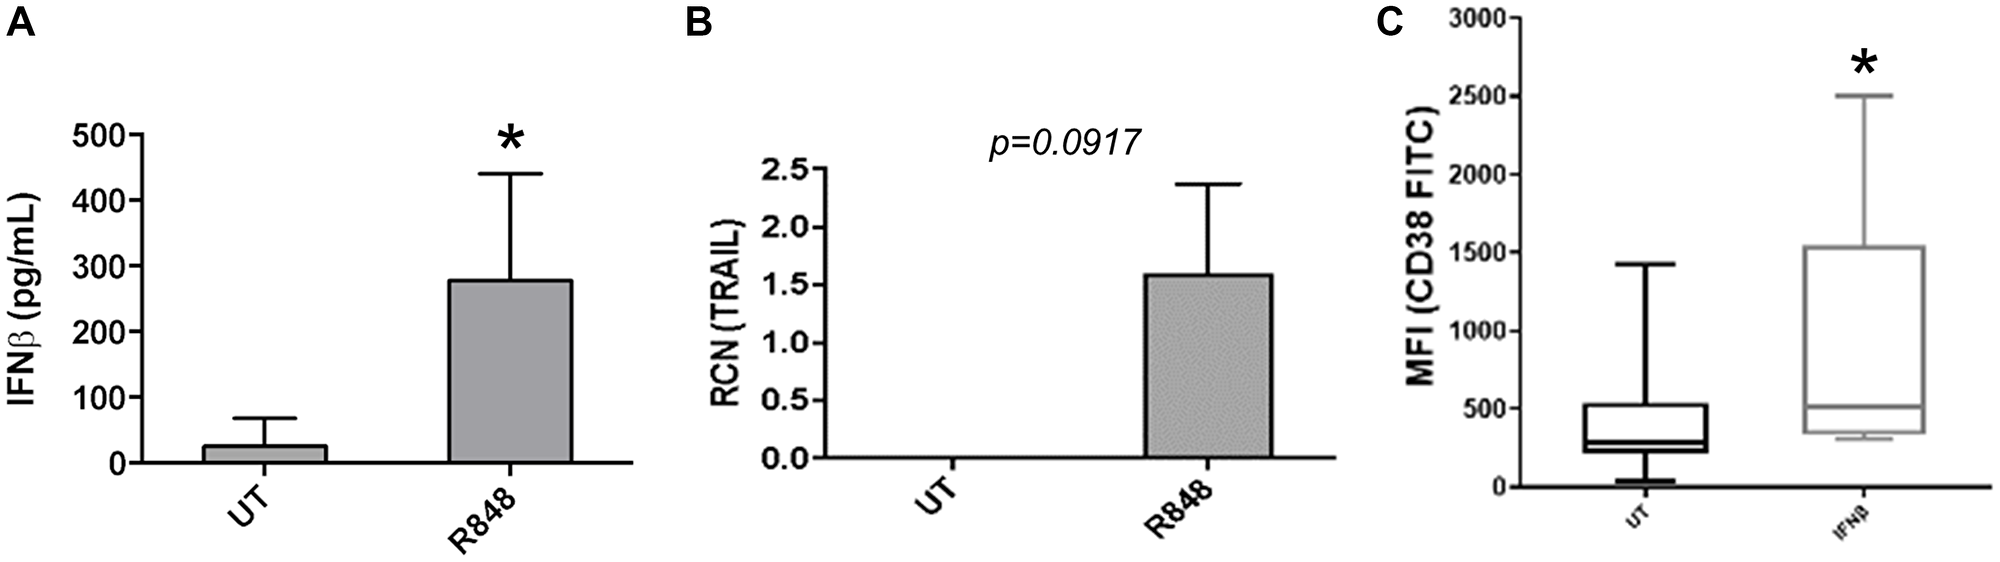 R848 induces functional changes in AML-patient pDCs.